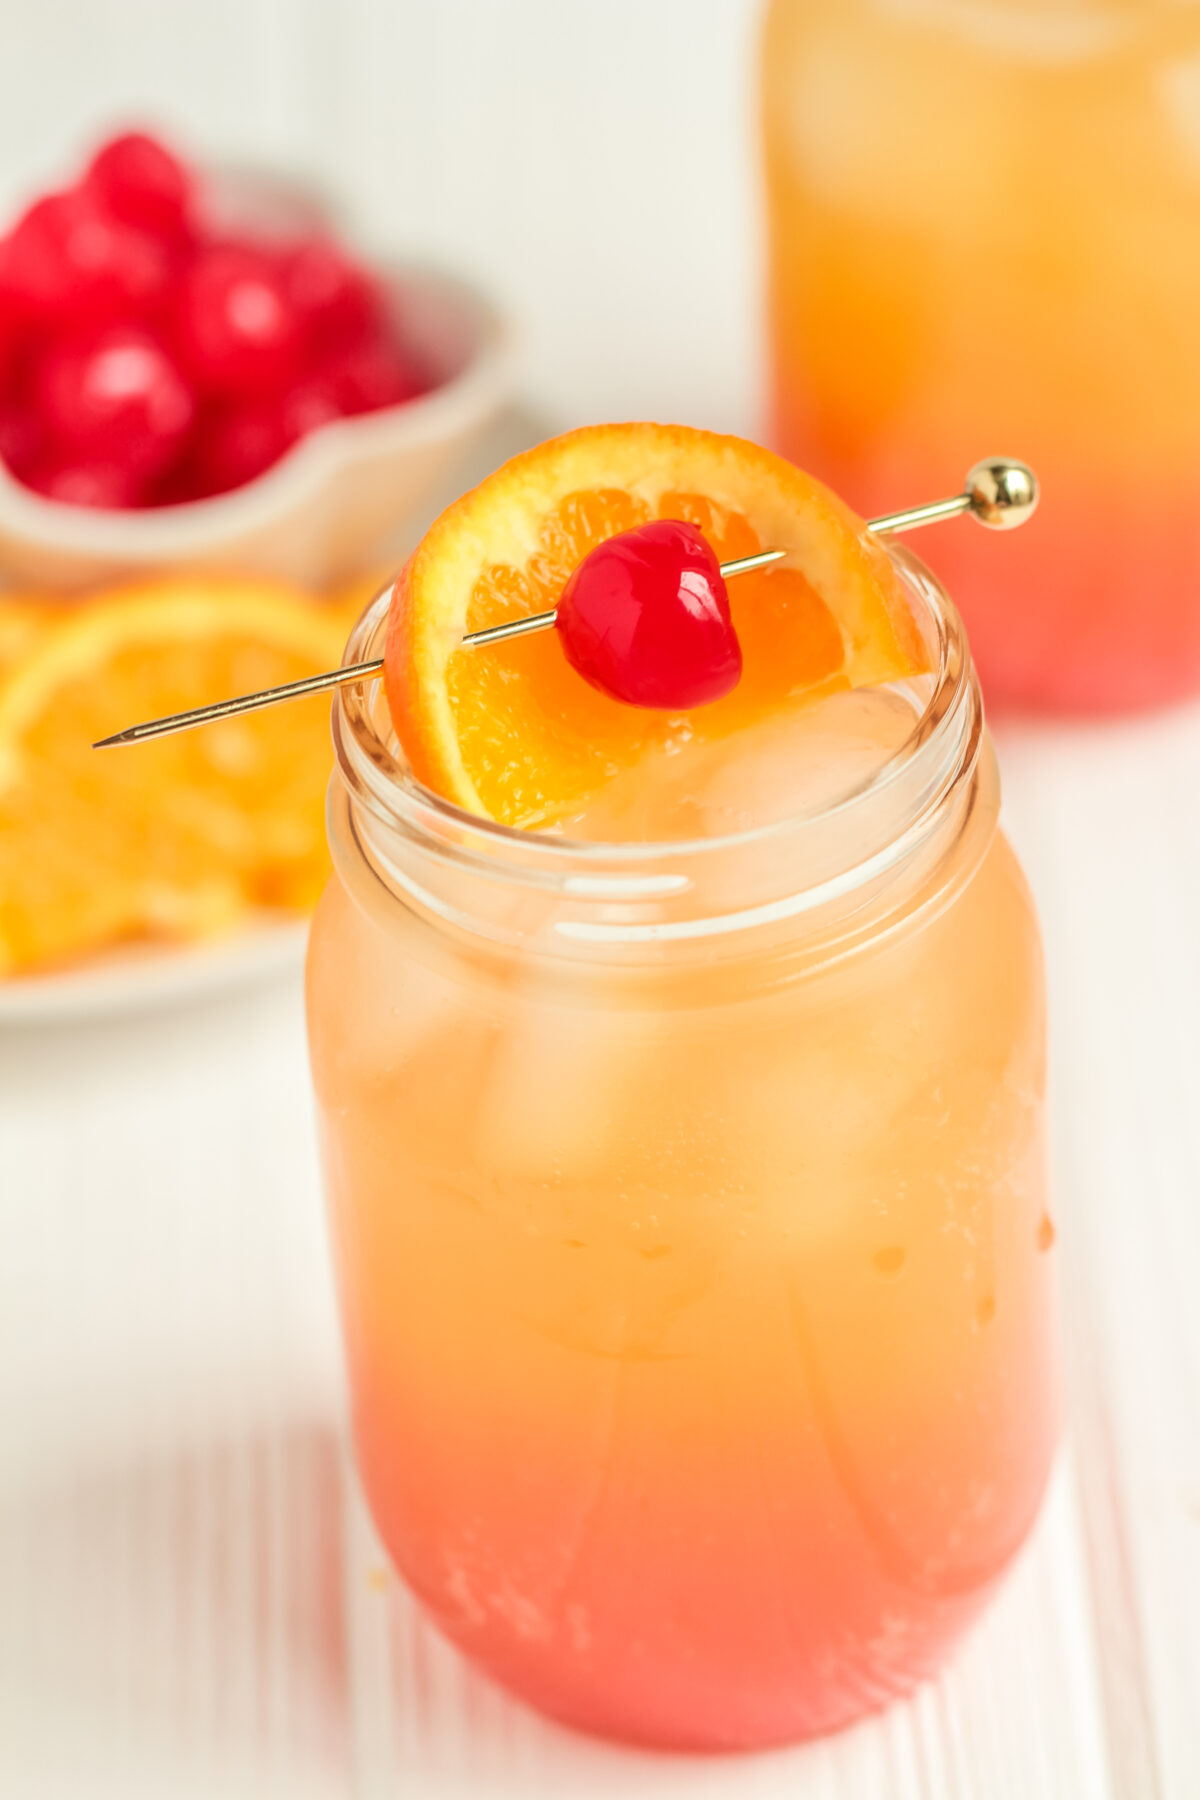 A classic Shirley Temple recipe made with lemon-lime soda, orange juice, and grenadine. Perfect fun and fancy mocktail for any party!